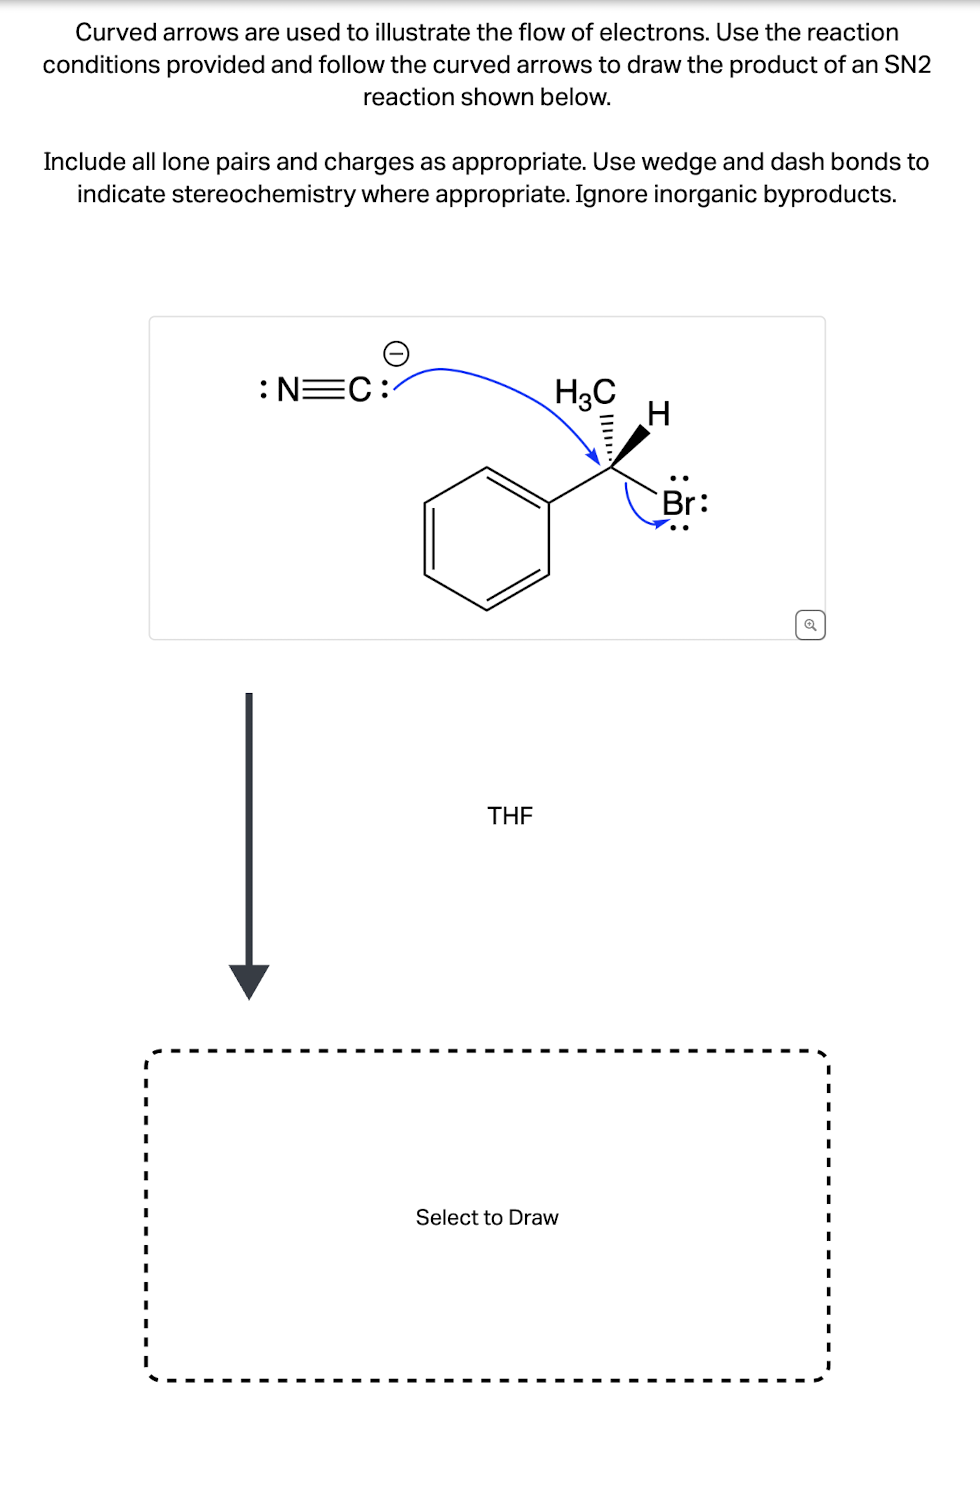 Curved arrows are used to illustrate the flow of electrons. Use the reaction
conditions provided and follow the curved arrows to draw the product of an SN2
reaction shown below.
Include all lone pairs and charges as appropriate. Use wedge and dash bonds to
indicate stereochemistry where appropriate. Ignore inorganic byproducts.
N=C:
H3C
H
Br:
THF
Select to Draw
Q